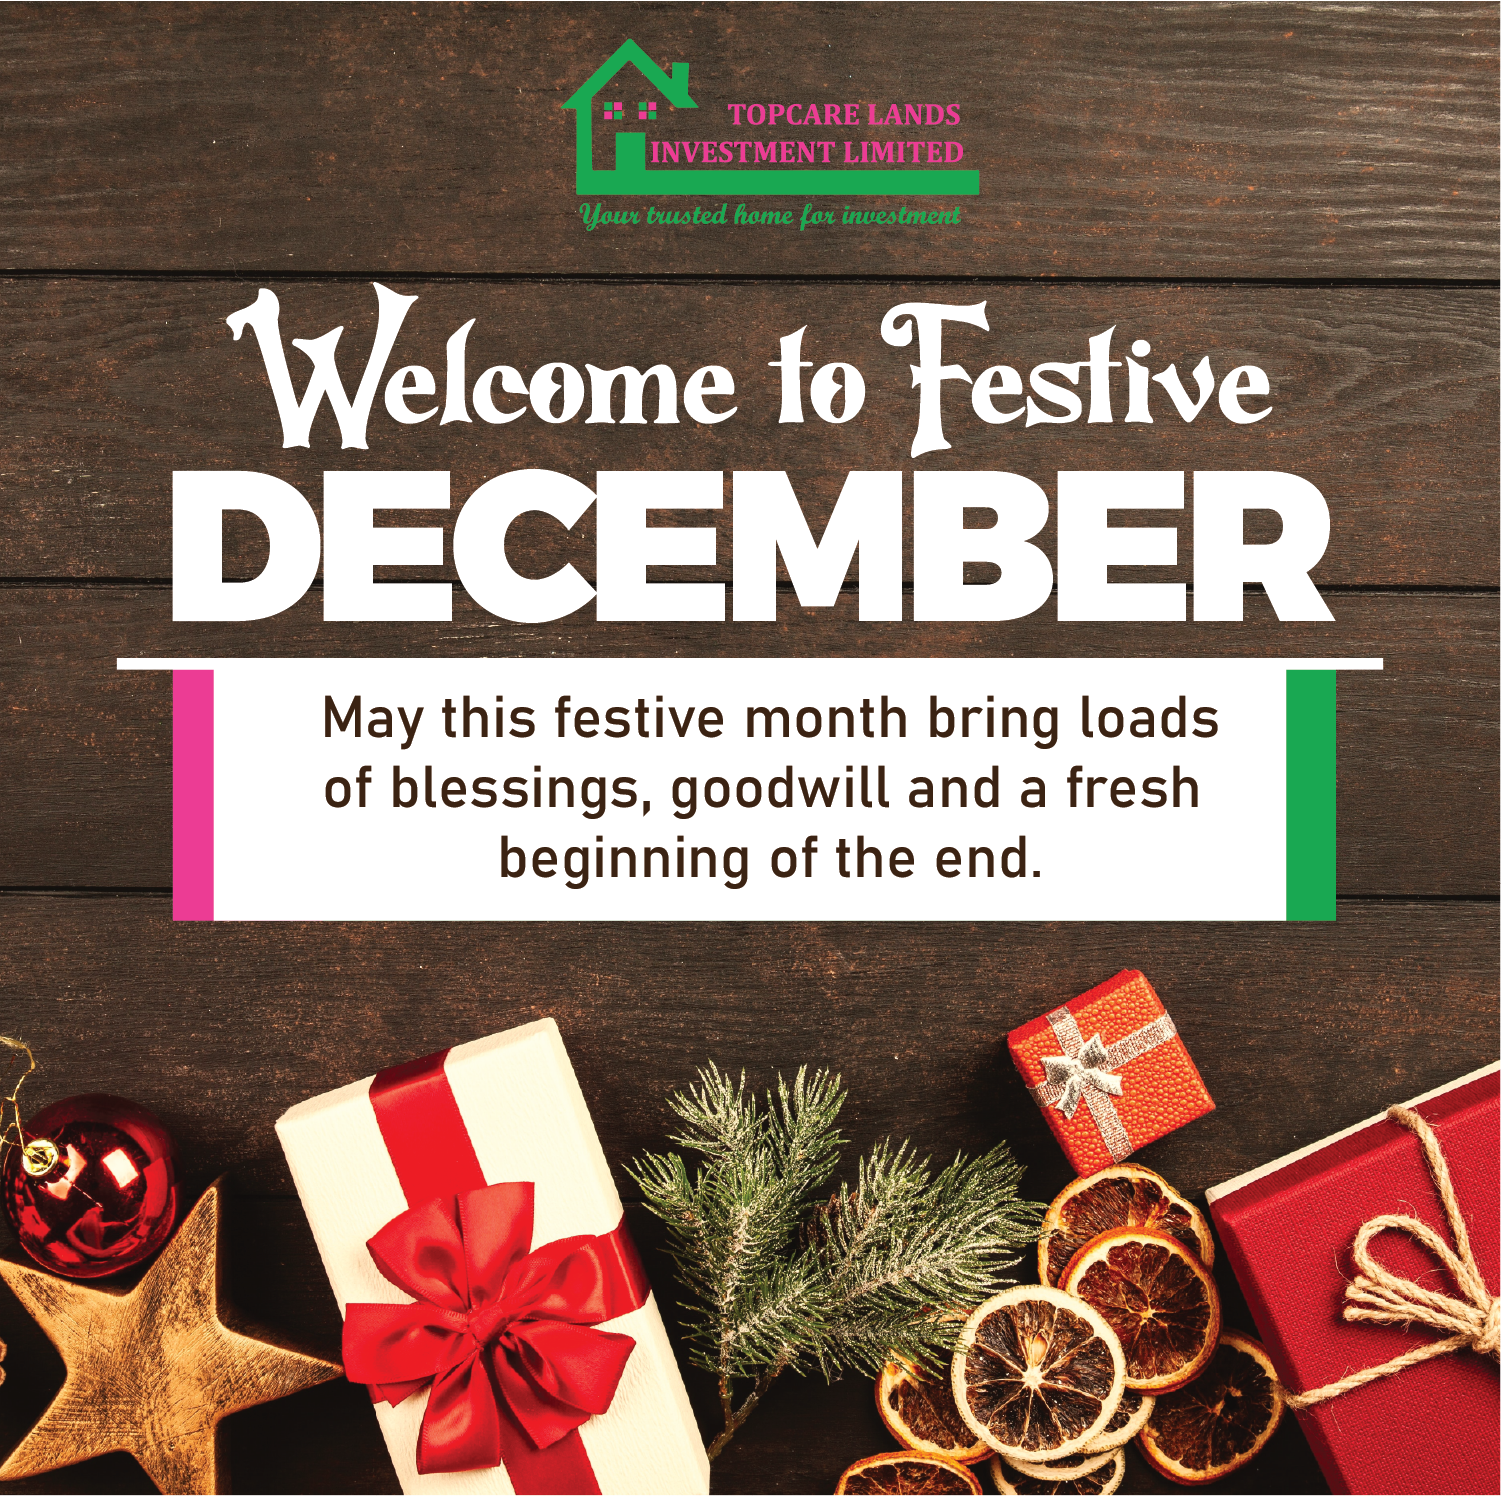 Welcome to Festive December